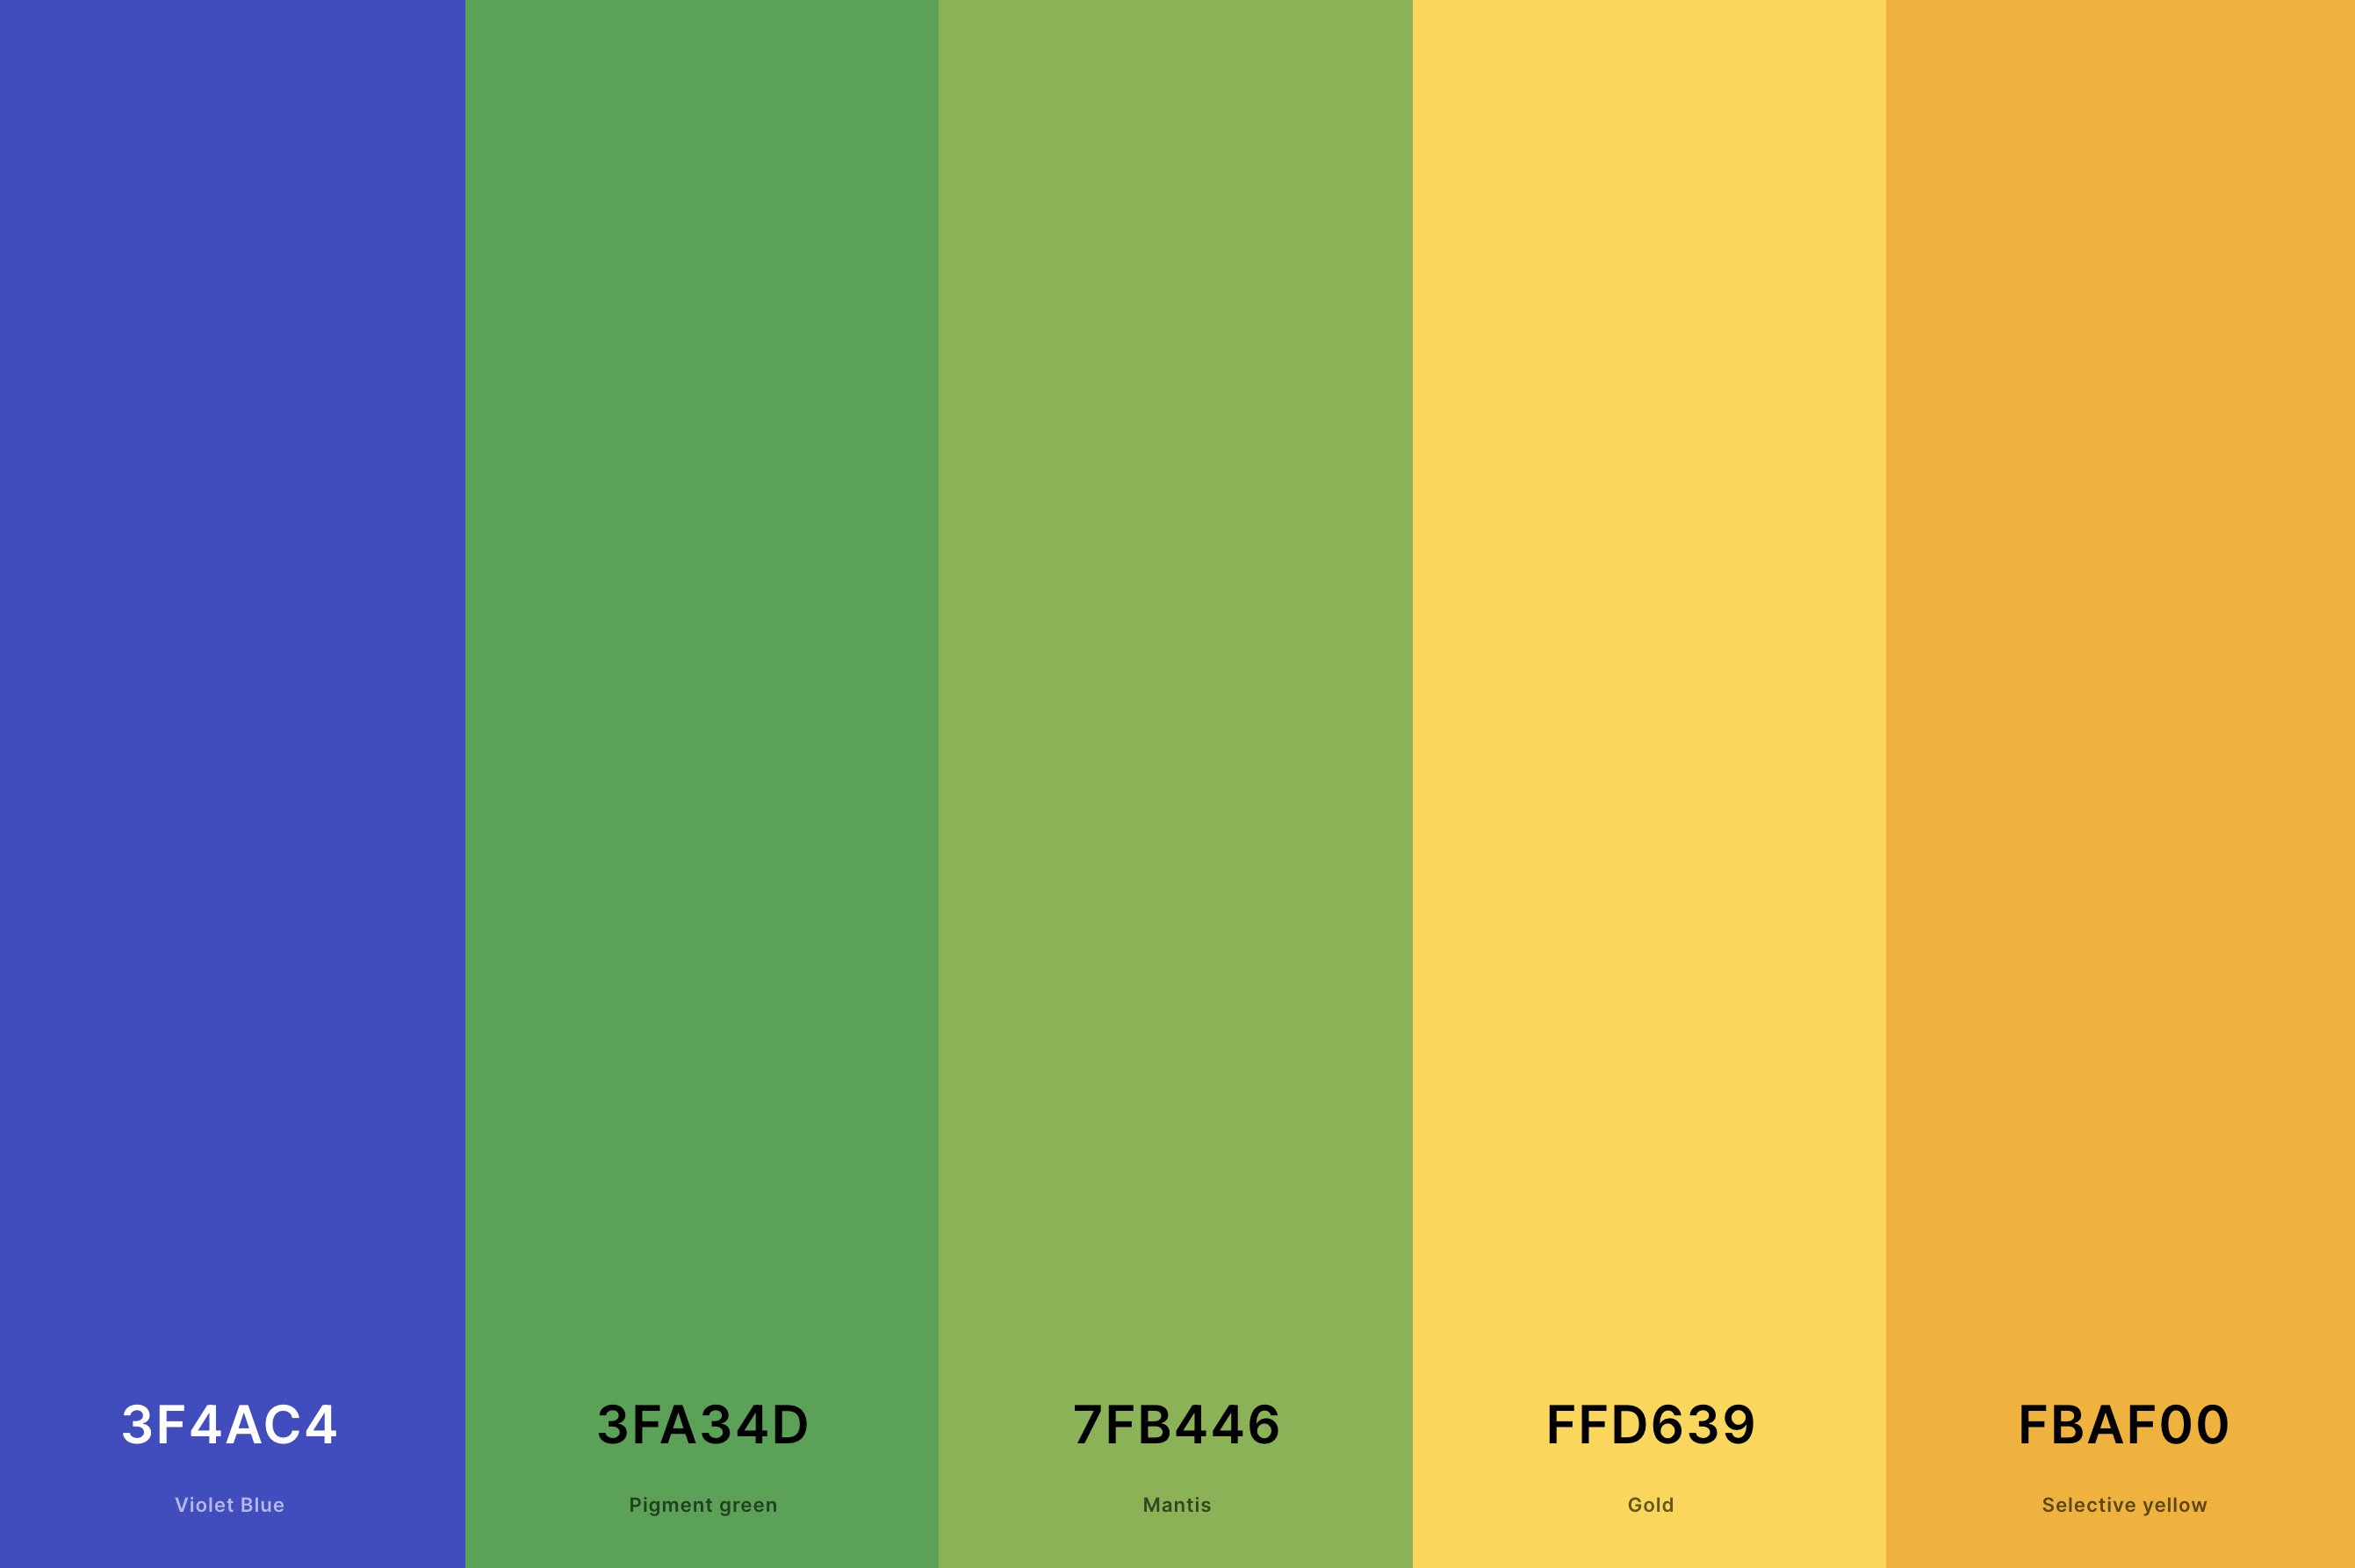 10. Blue, Green And Yellow Color Palette Color Palette with Violet Blue (Hex #3F4AC4) + Pigment Green (Hex #3FA34D) + Mantis (Hex #7FB446) + Gold (Hex #FFD639) + Selective Yellow (Hex #FBAF00) Color Palette with Hex Codes